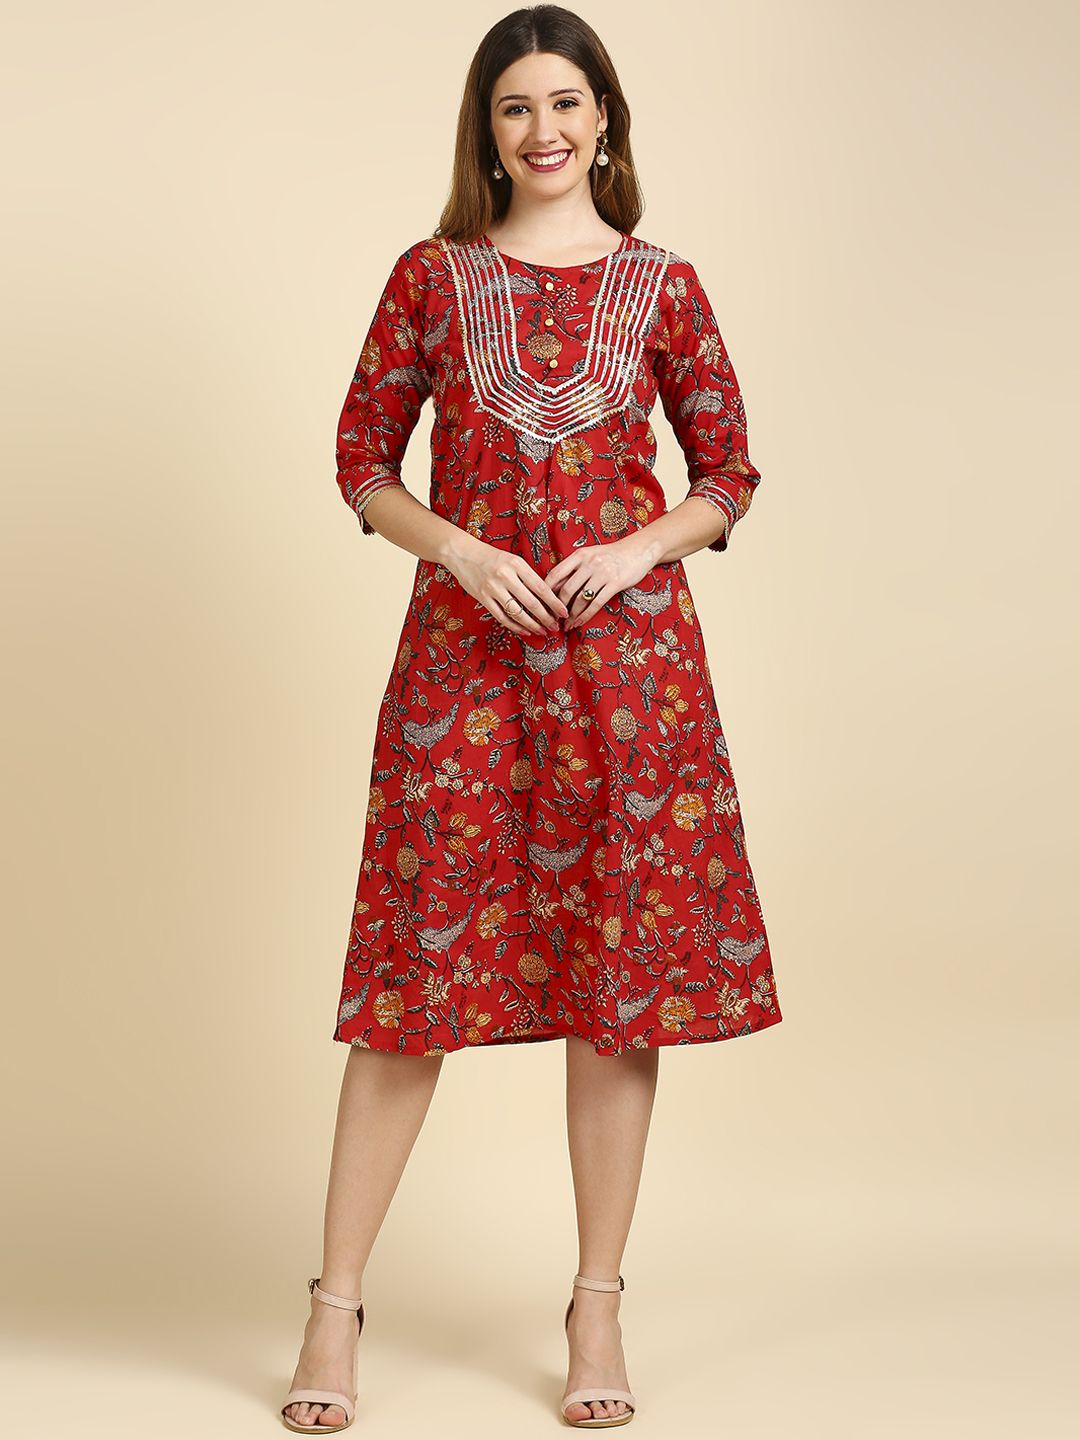 Anubhutee Red Ethnic Motifs A-Line Midi Dress Price in India